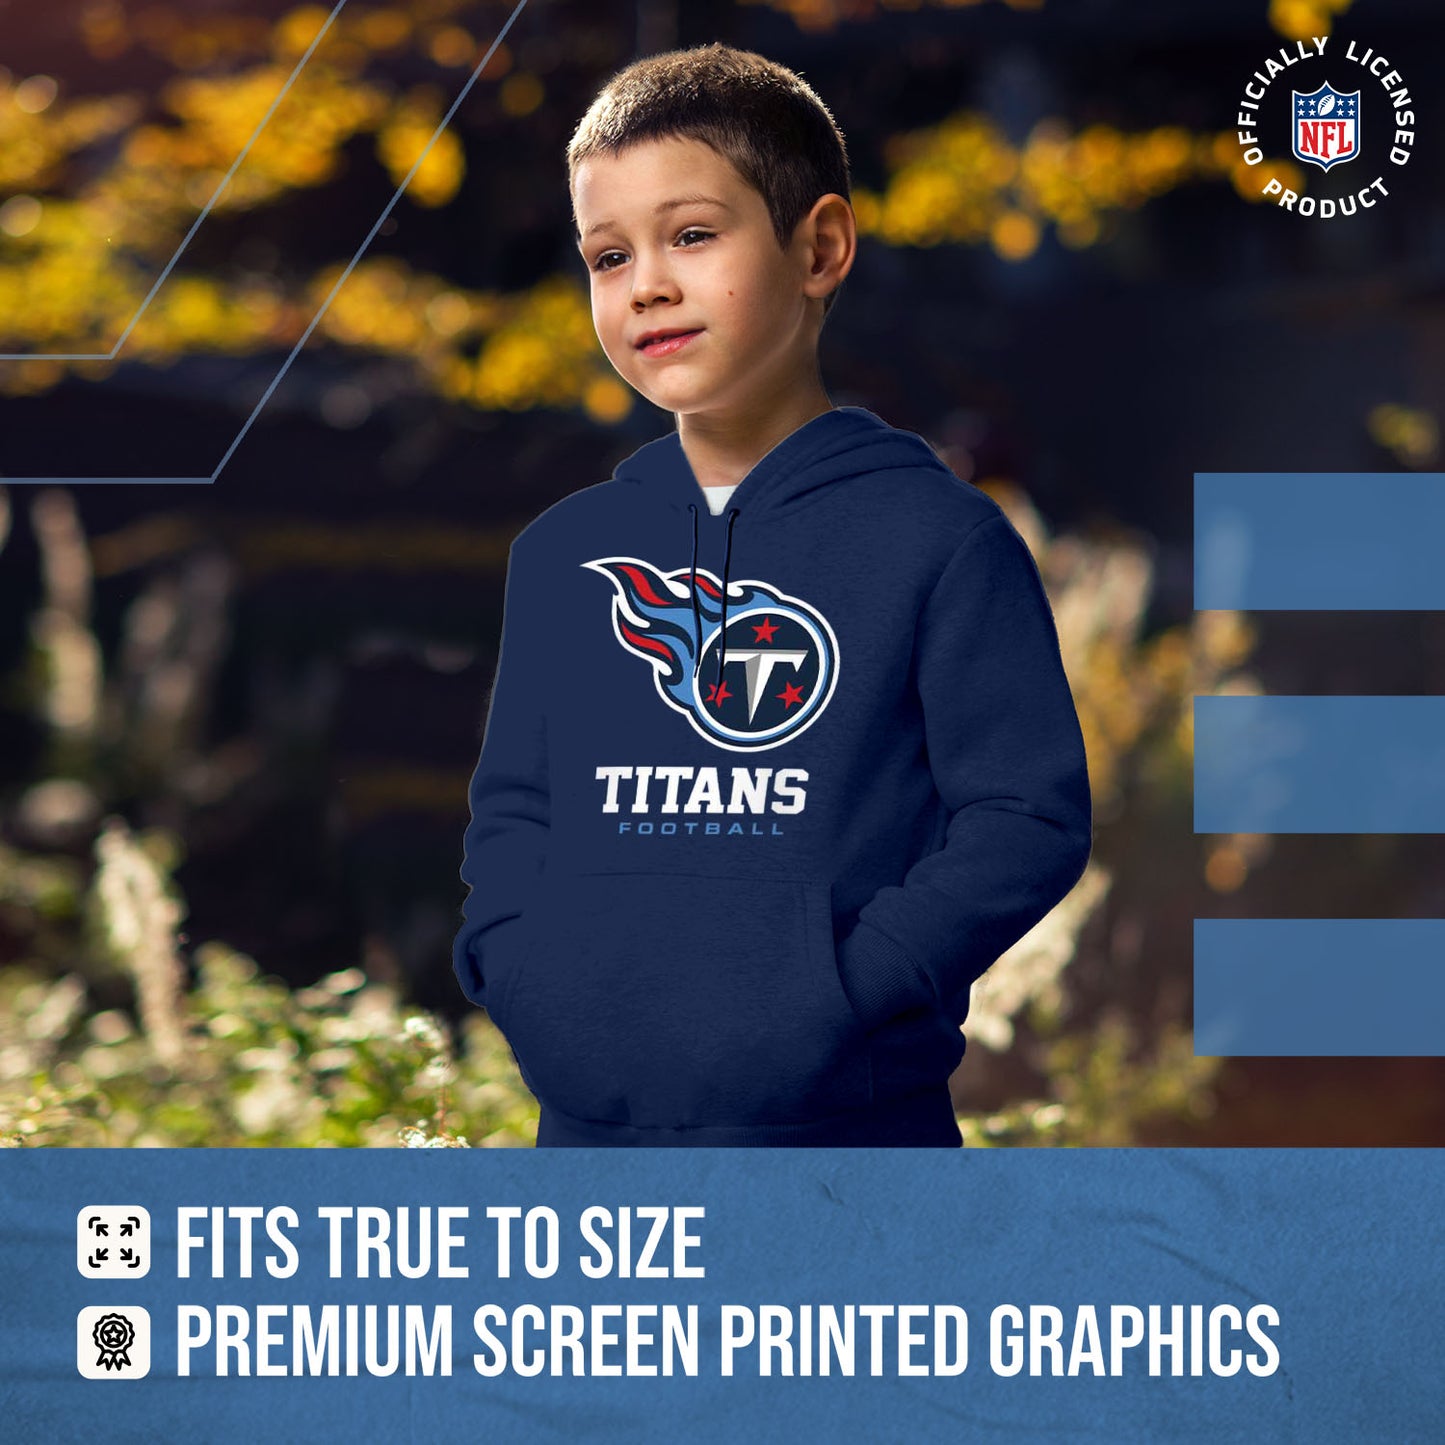 Tennessee Titans Youth NFL Ultimate Fan Logo Fleece Hooded Sweatshirt -Tagless Football Pullover For Kids - Navy